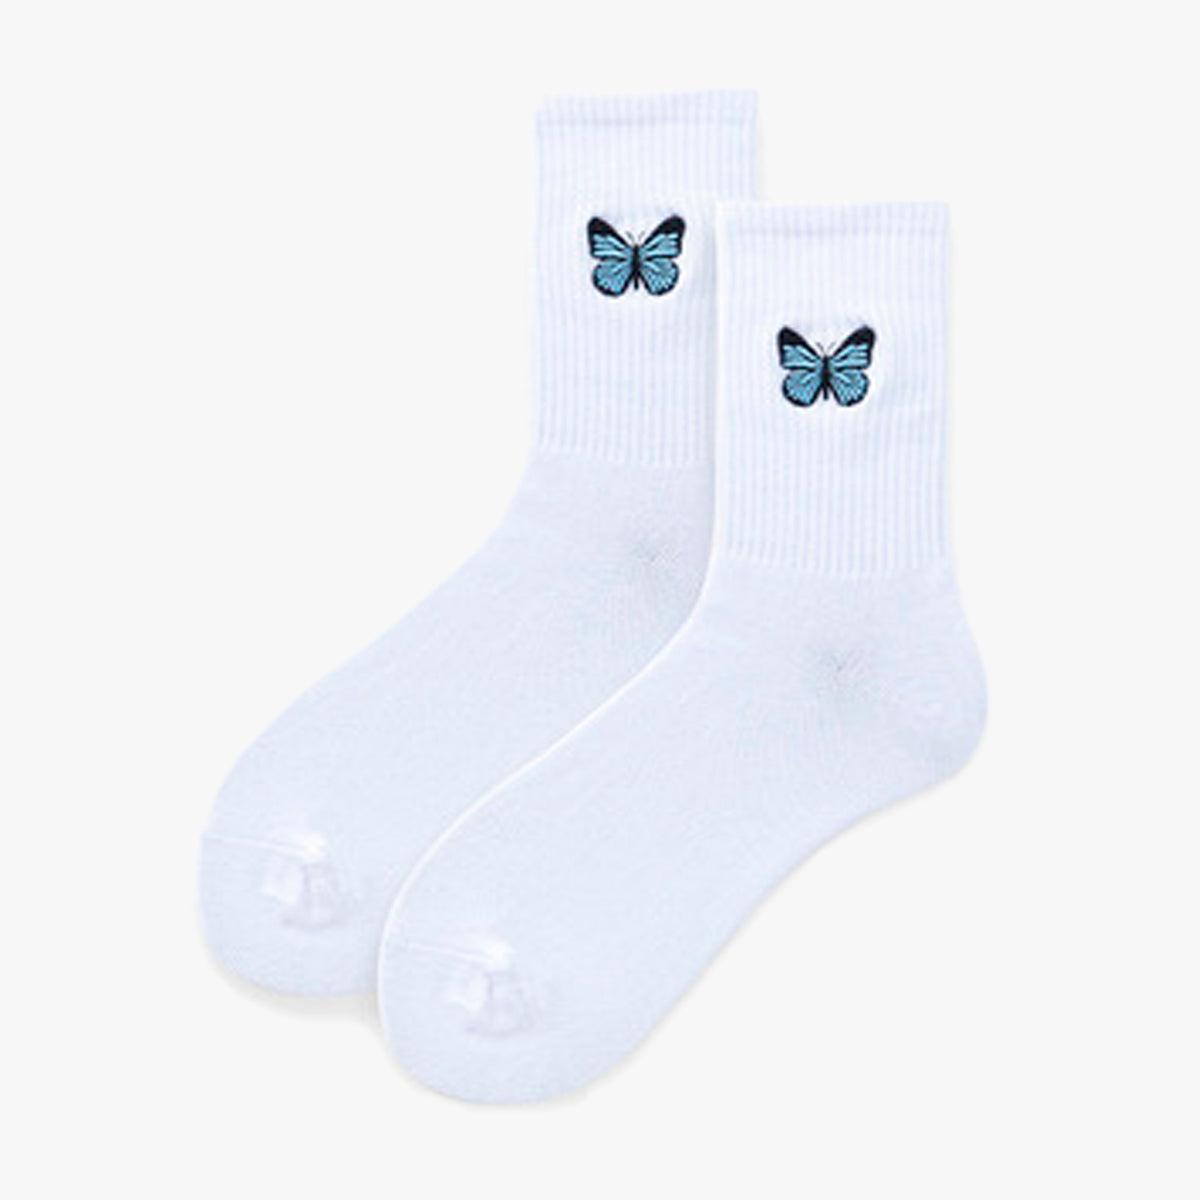 Butterfly Aesthetic Socks High Ankle - Aesthetic Clothes Shop